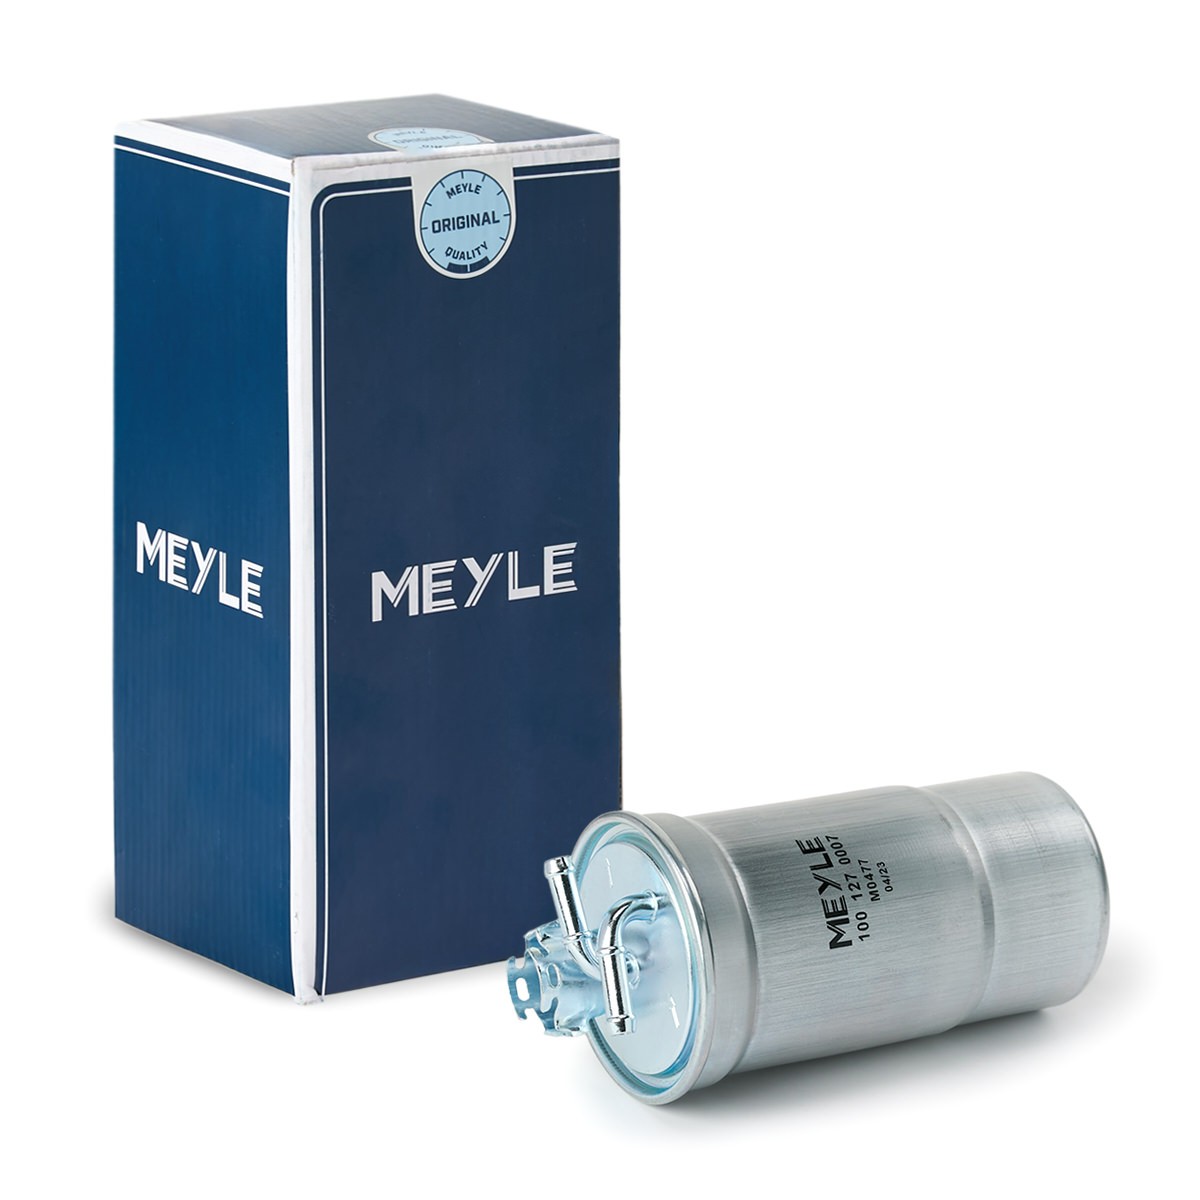 MEYLE 1001270007 Fuel filters In-Line Filter, ORIGINAL Quality